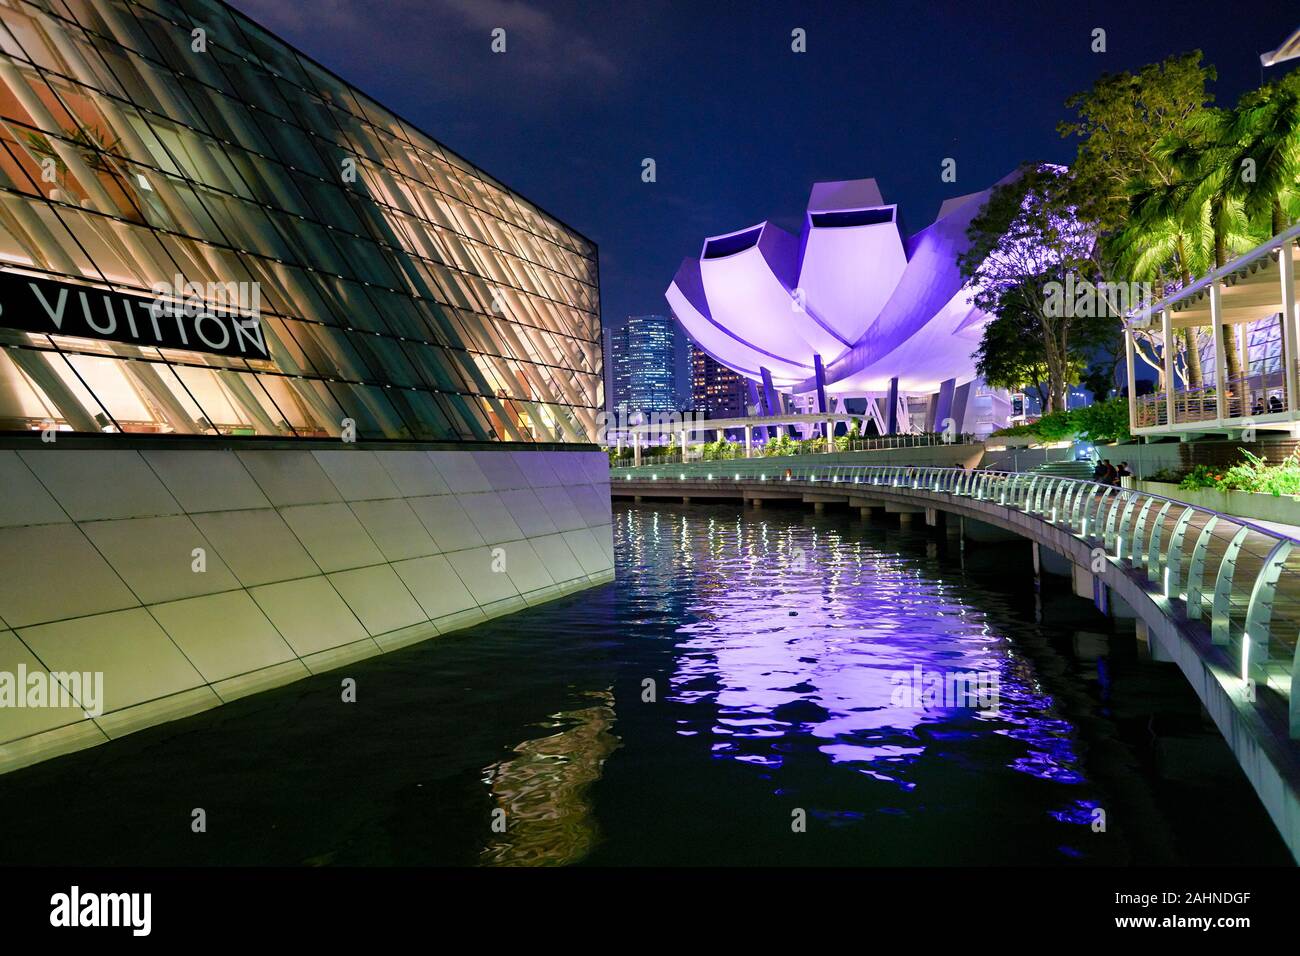 SINGAPORE - CIRCA APRIL, 2019: Interior Shot Of Louis Vuitton Store At The  Shoppes At Marina Bay Sands. Stock Photo, Picture and Royalty Free Image.  Image 139867090.